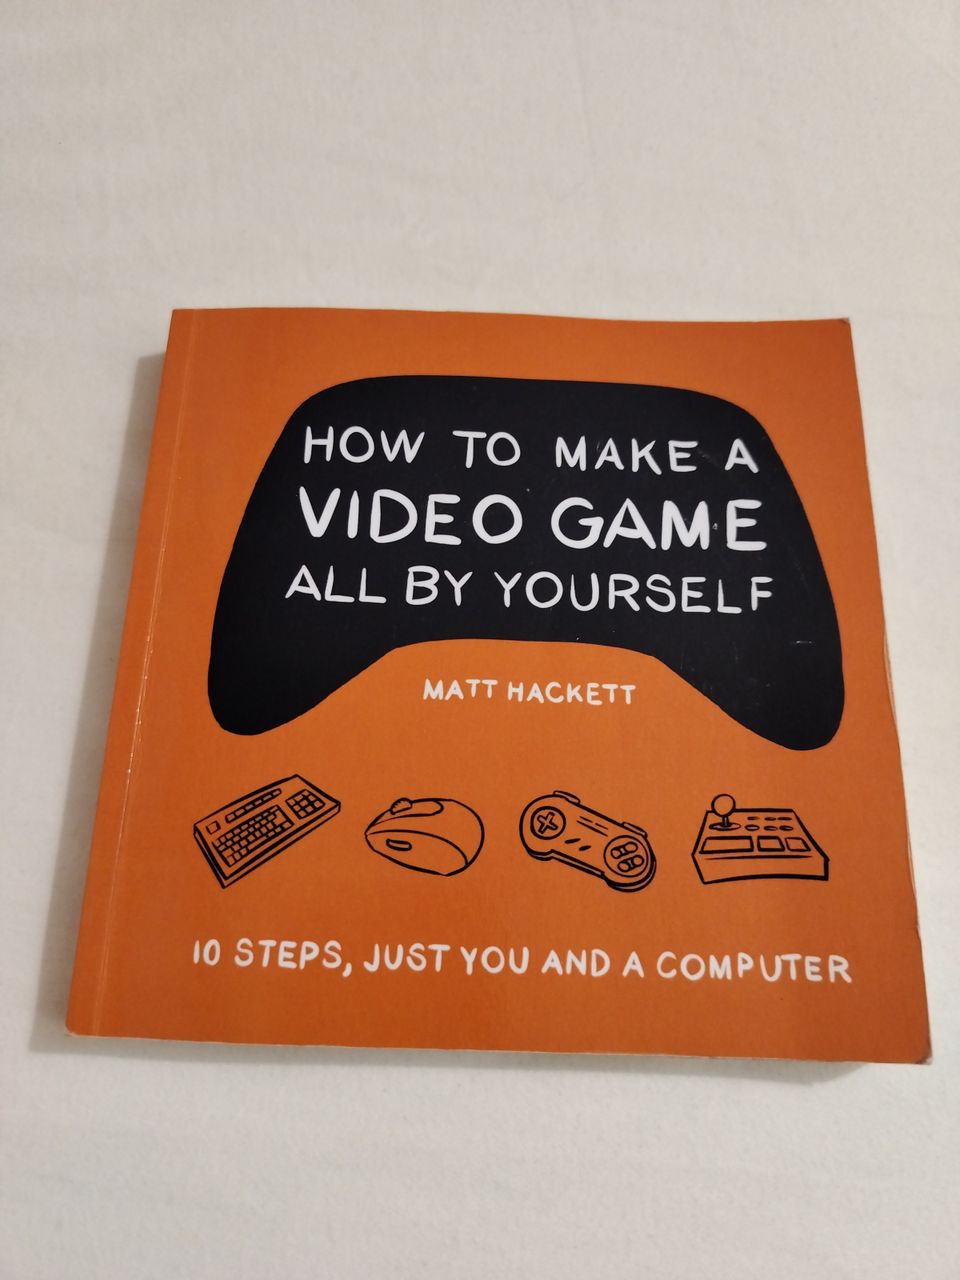 How to make a video game all by yourself - Matt Hackett